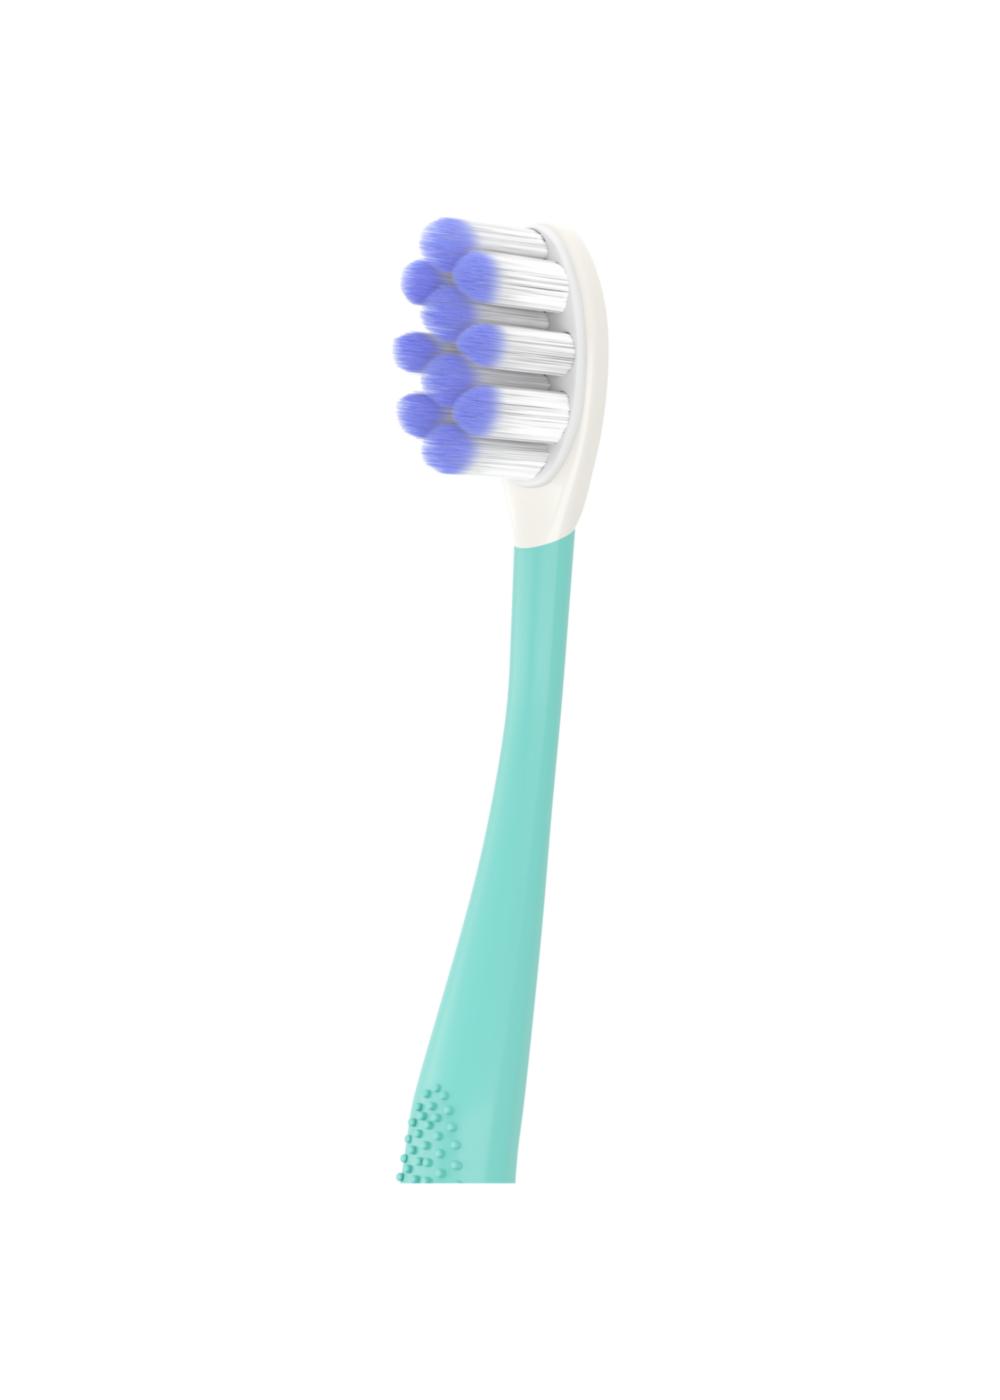 Colgate Sensitive Expert Toothbrushes - Ultra Soft; image 2 of 3